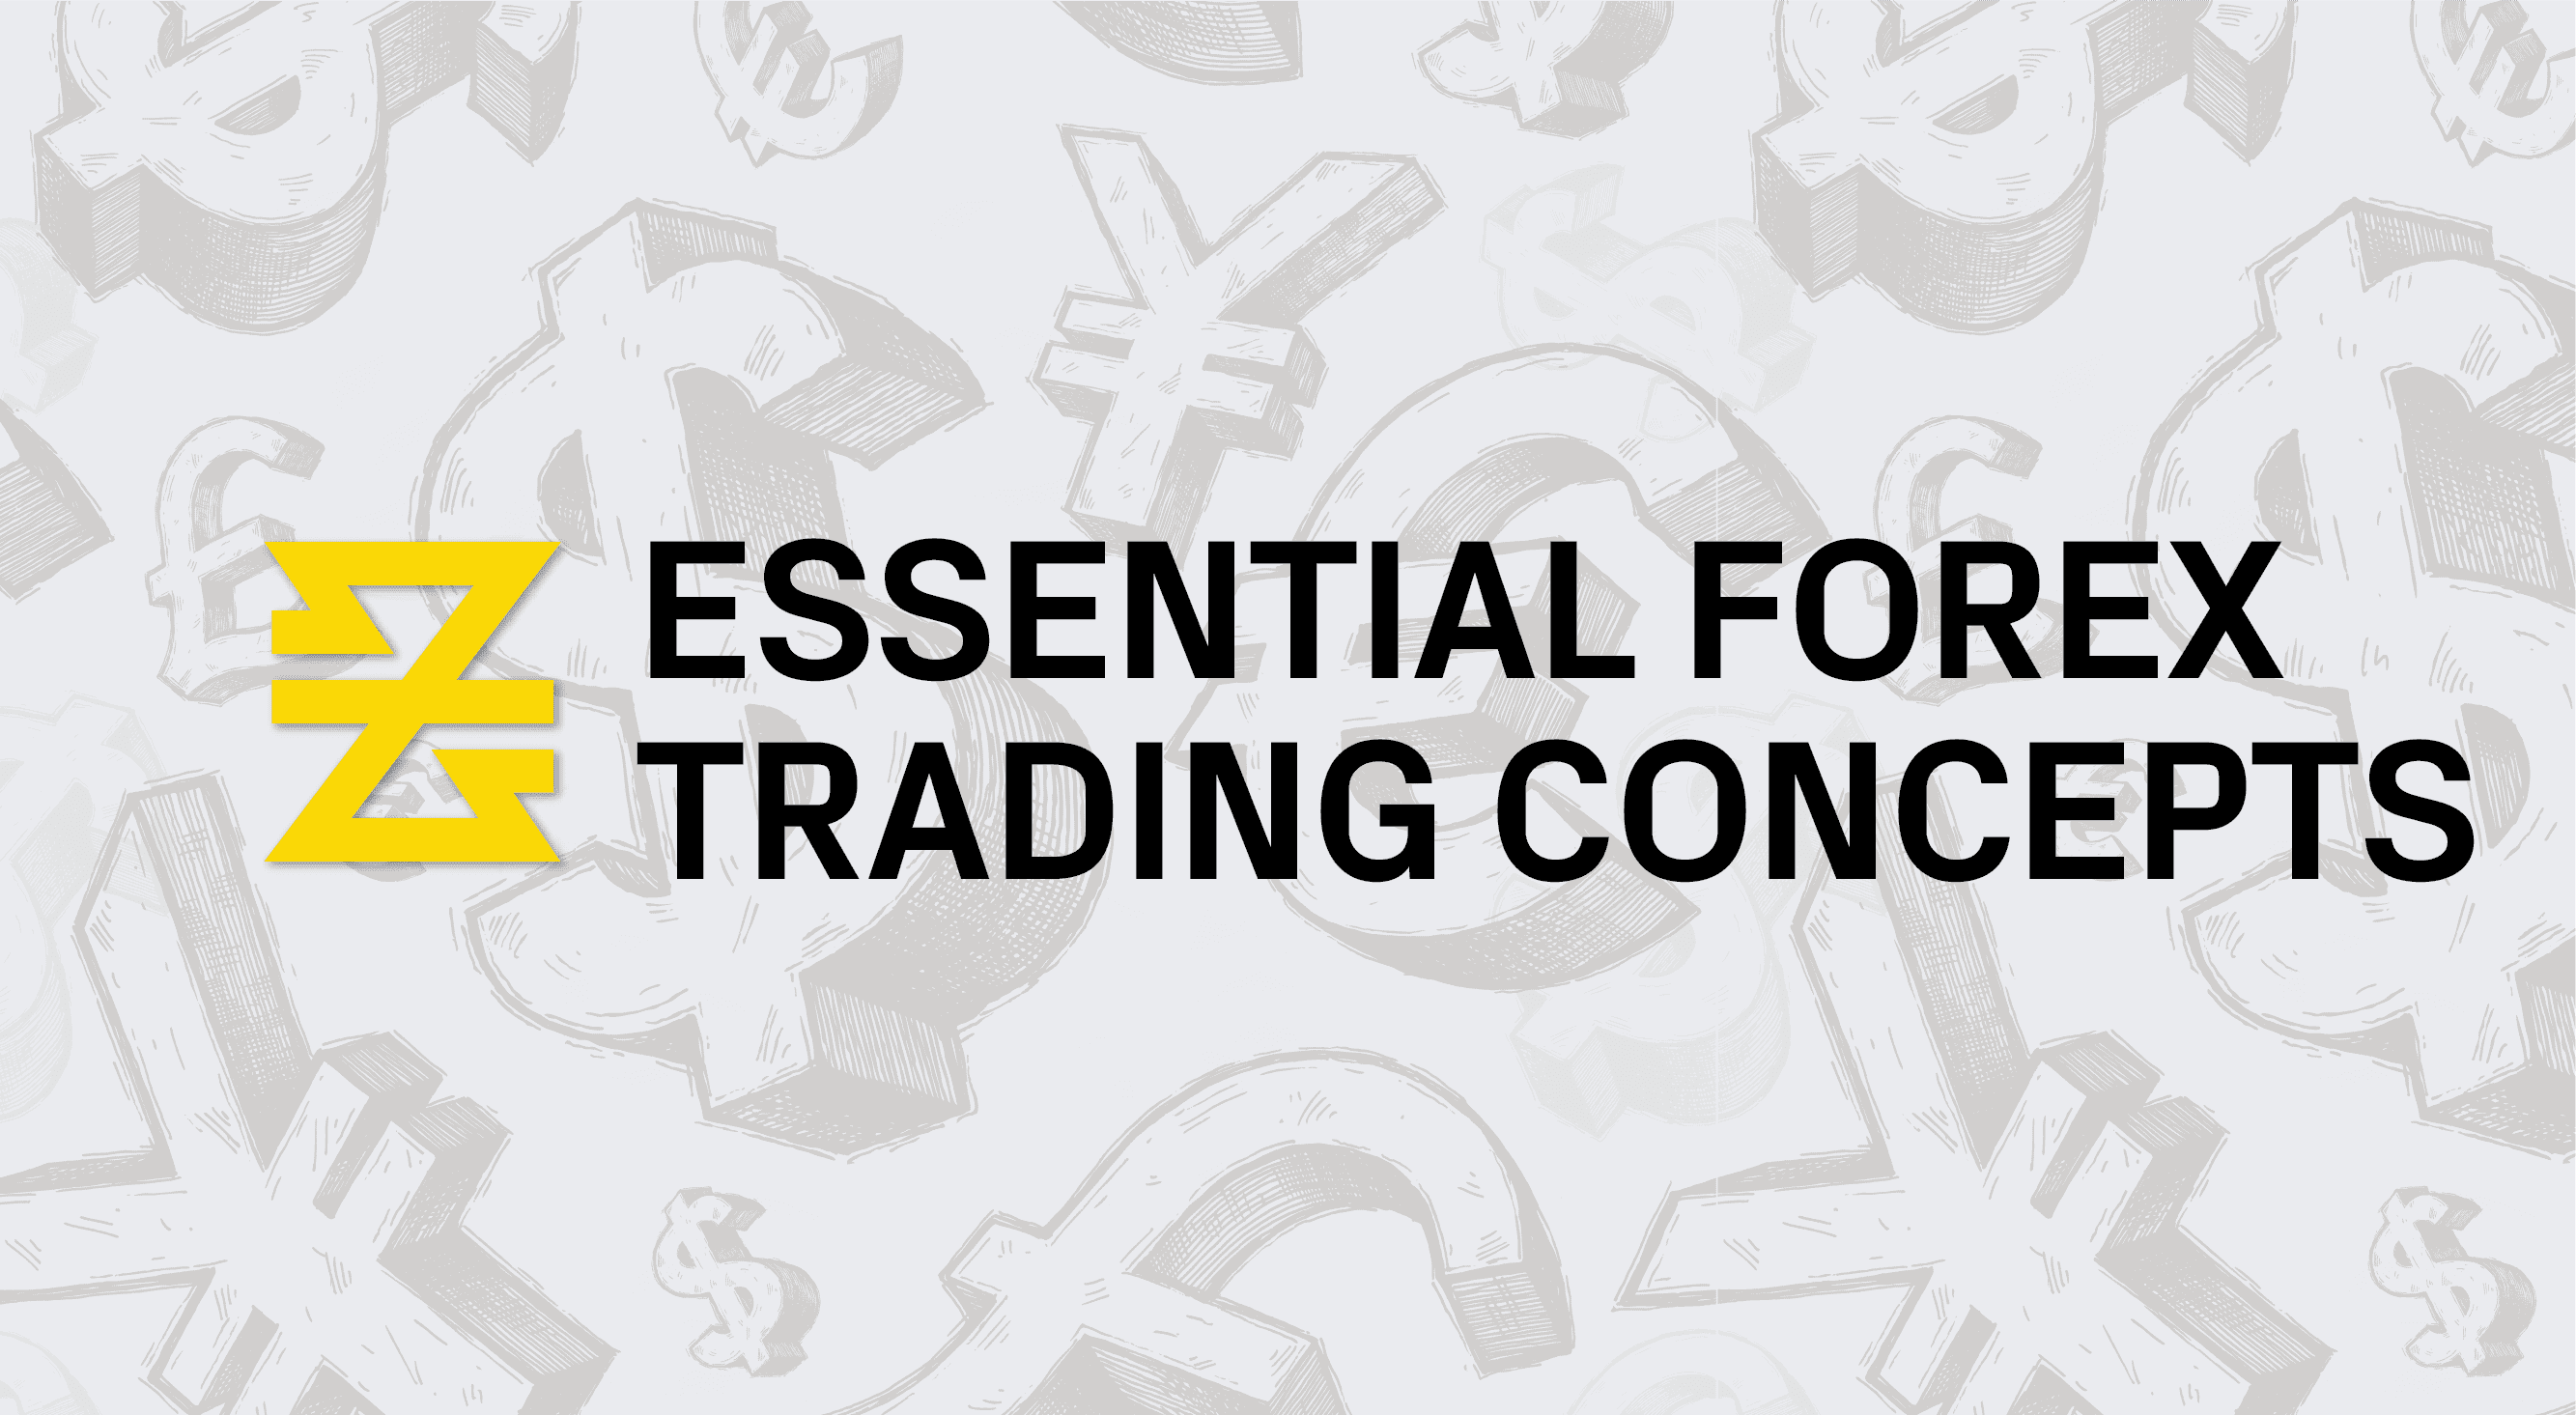 Essential Forex Trading Concepts - chapter - baxia markets